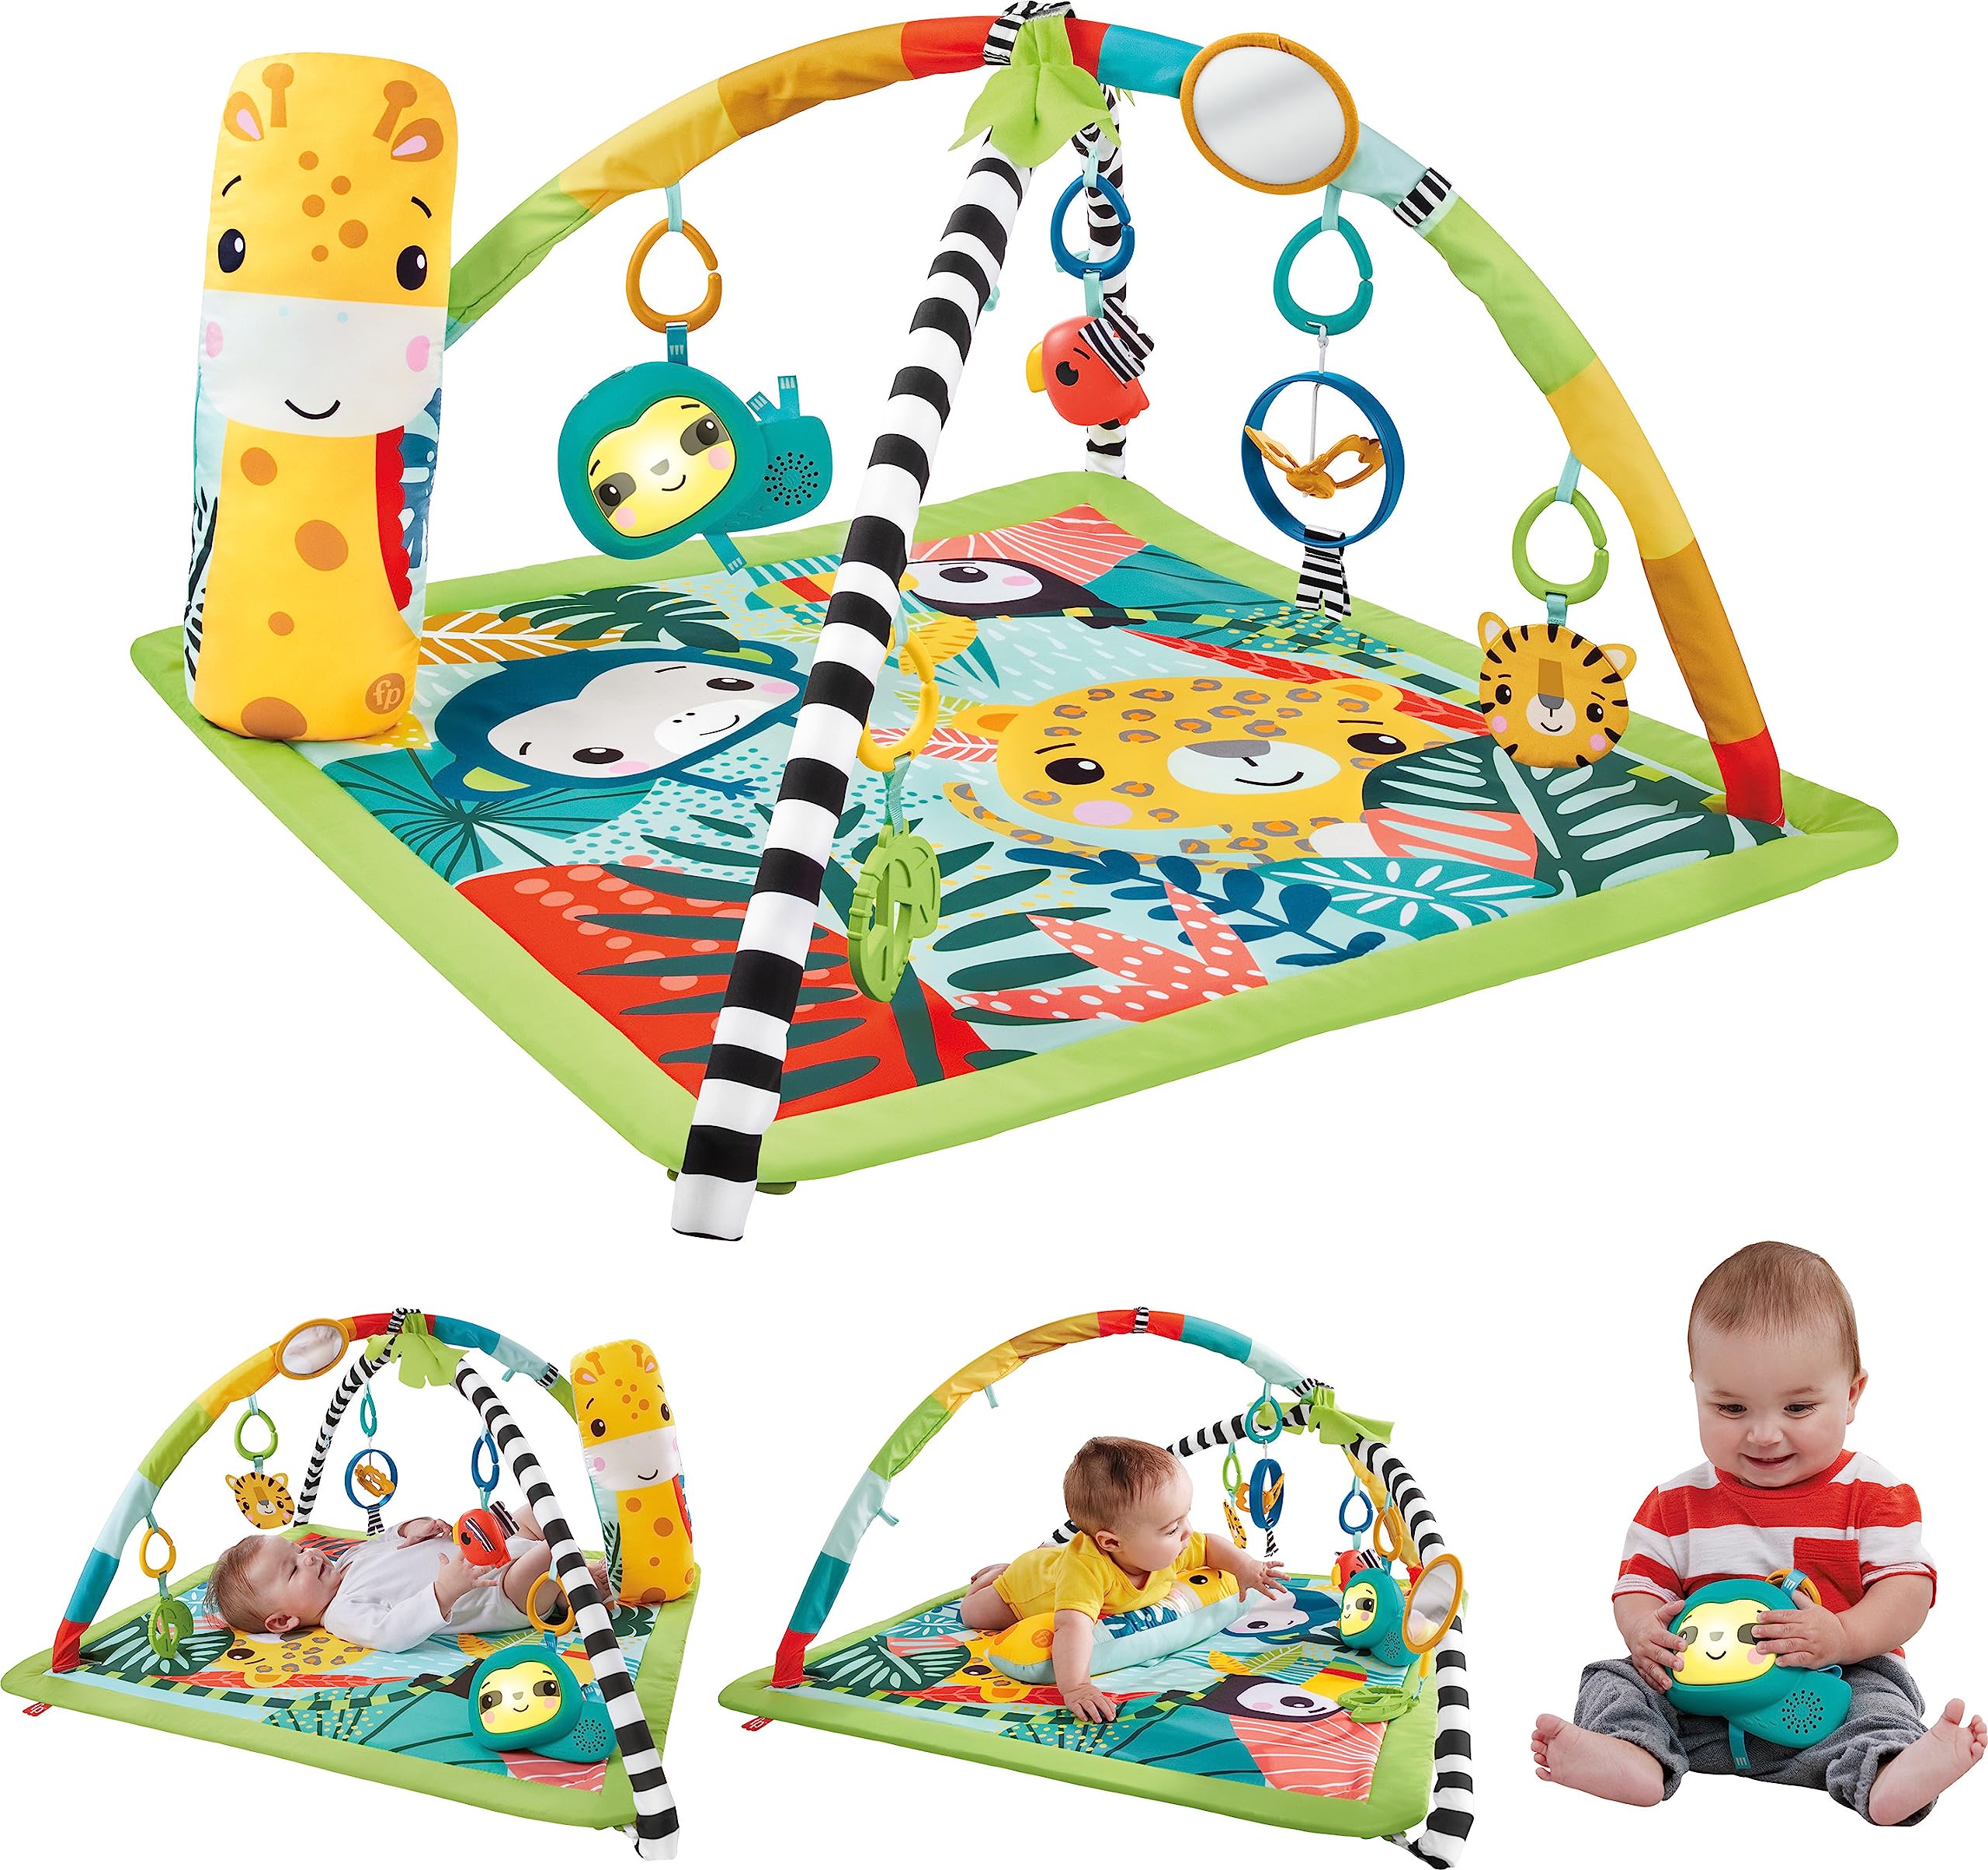 Fisher Price Newborn To Toddler Playmat 3-In-1 Rainforest Sensory Gym with Tummy Wedge, 5 Baby Toys and Music & Lights Sloth